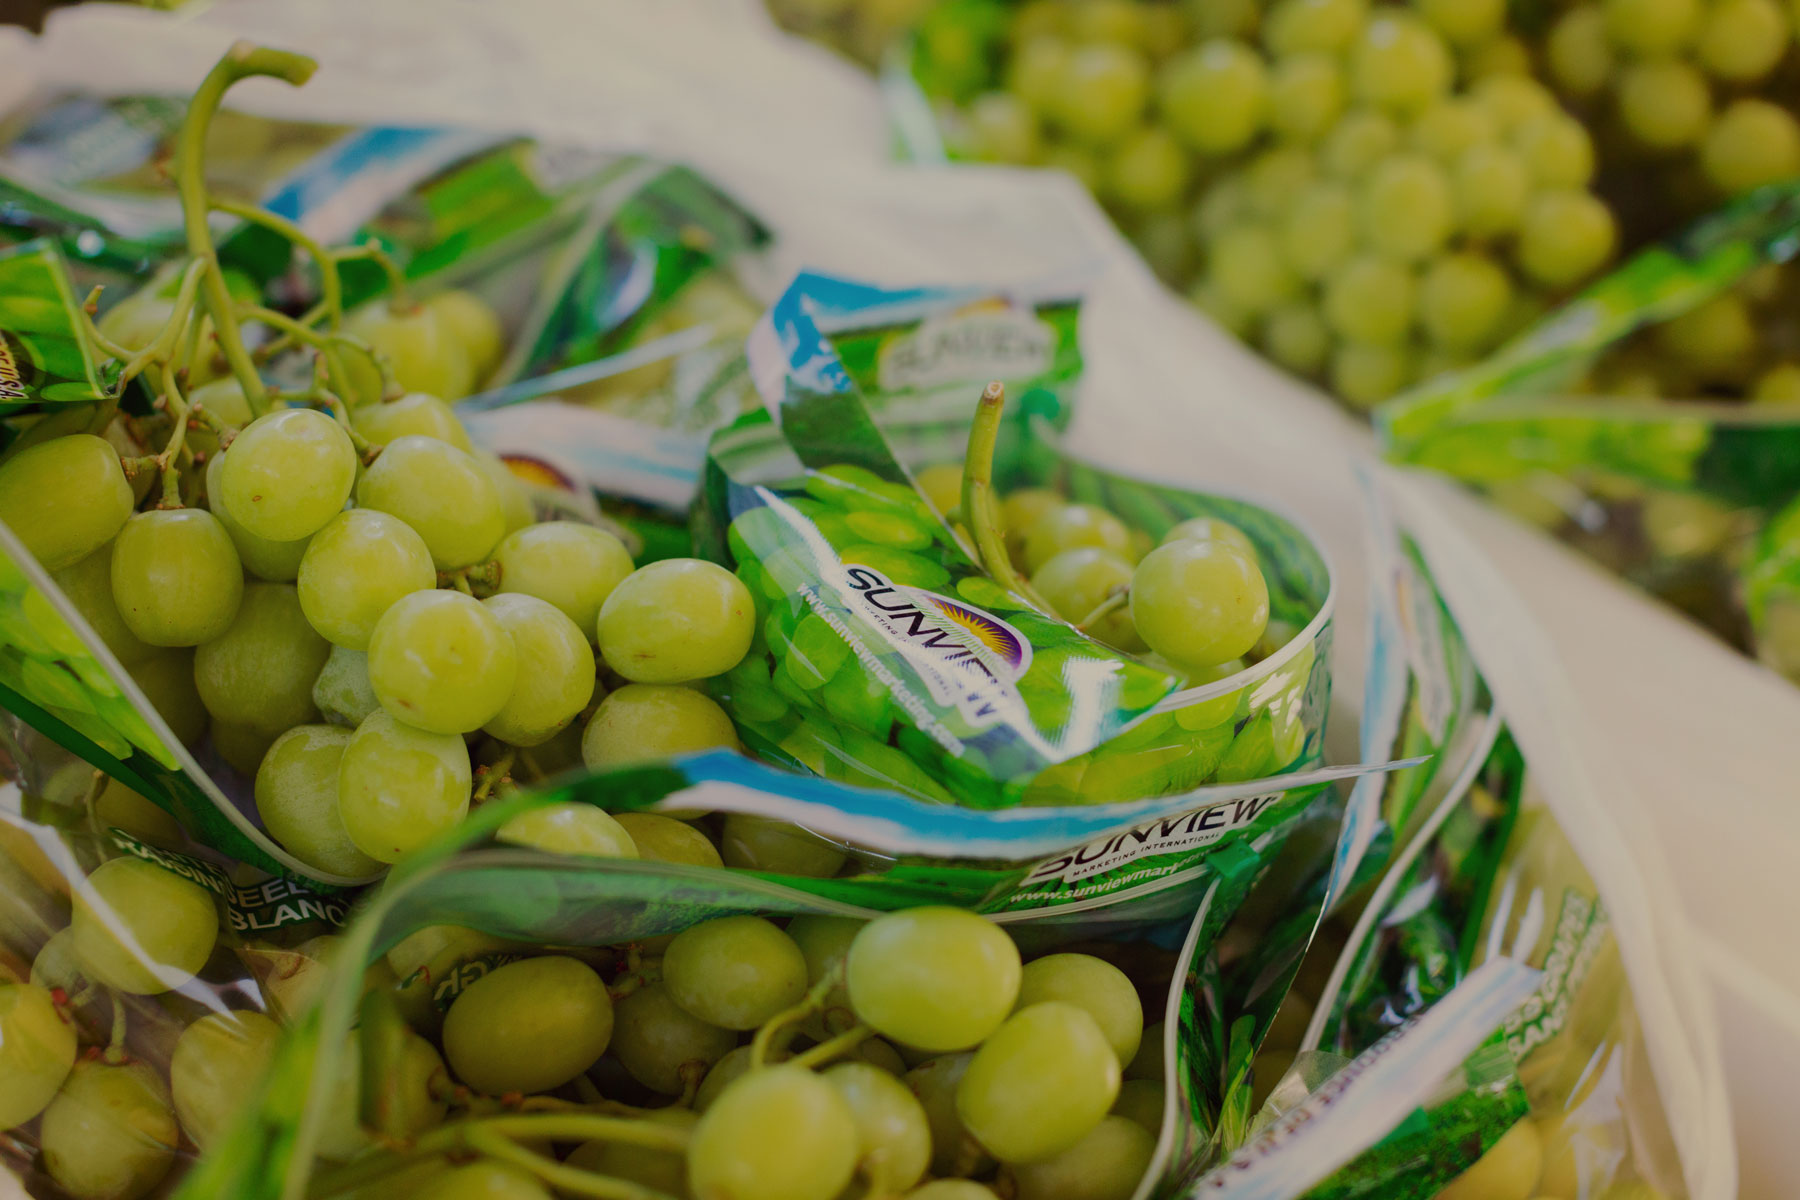 Sunview green grapes